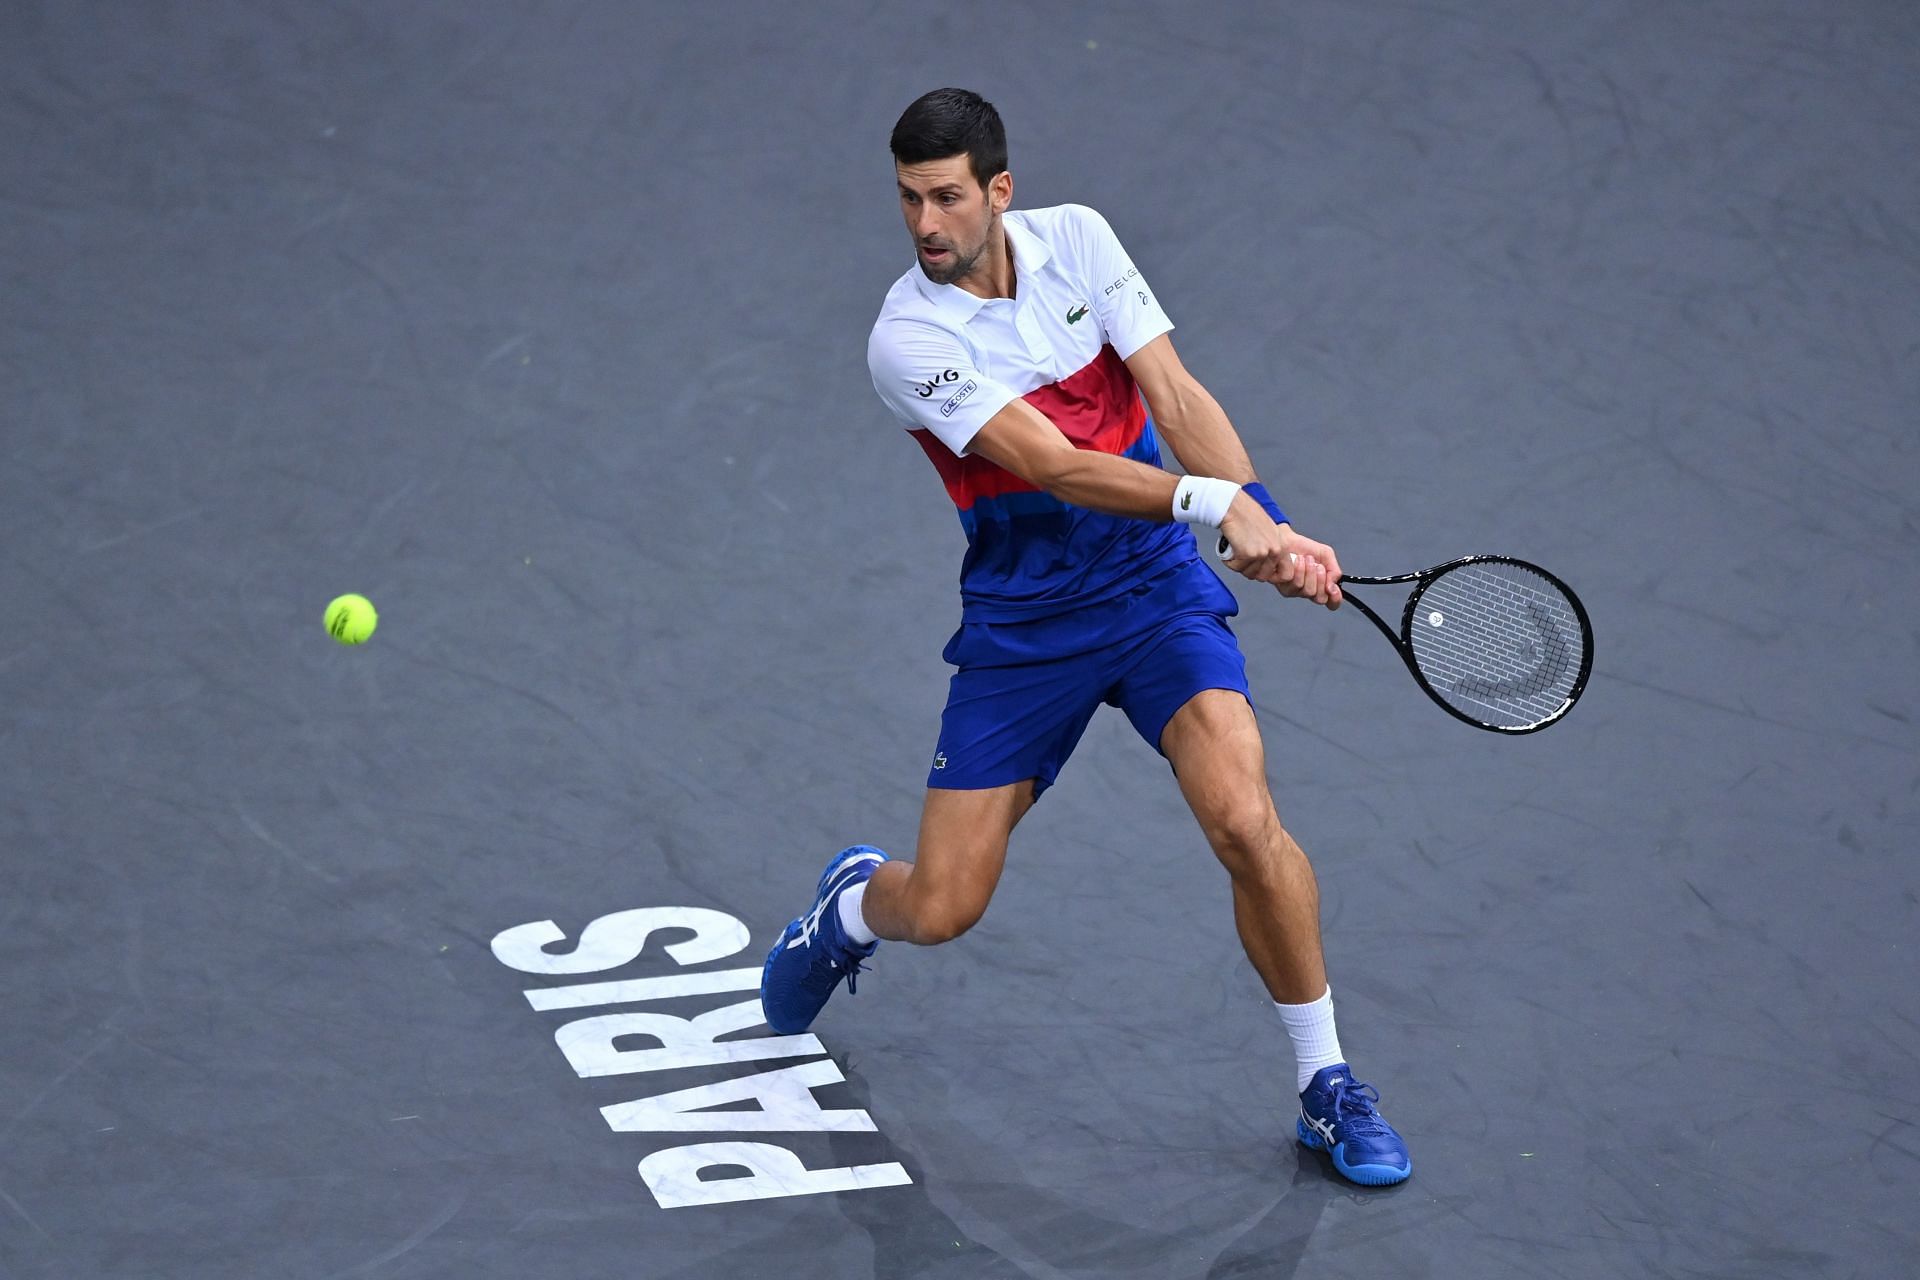 Novak Djokovic is one win away from securing the Year-End No. 1 ranking ahead of Daniil Medvedev